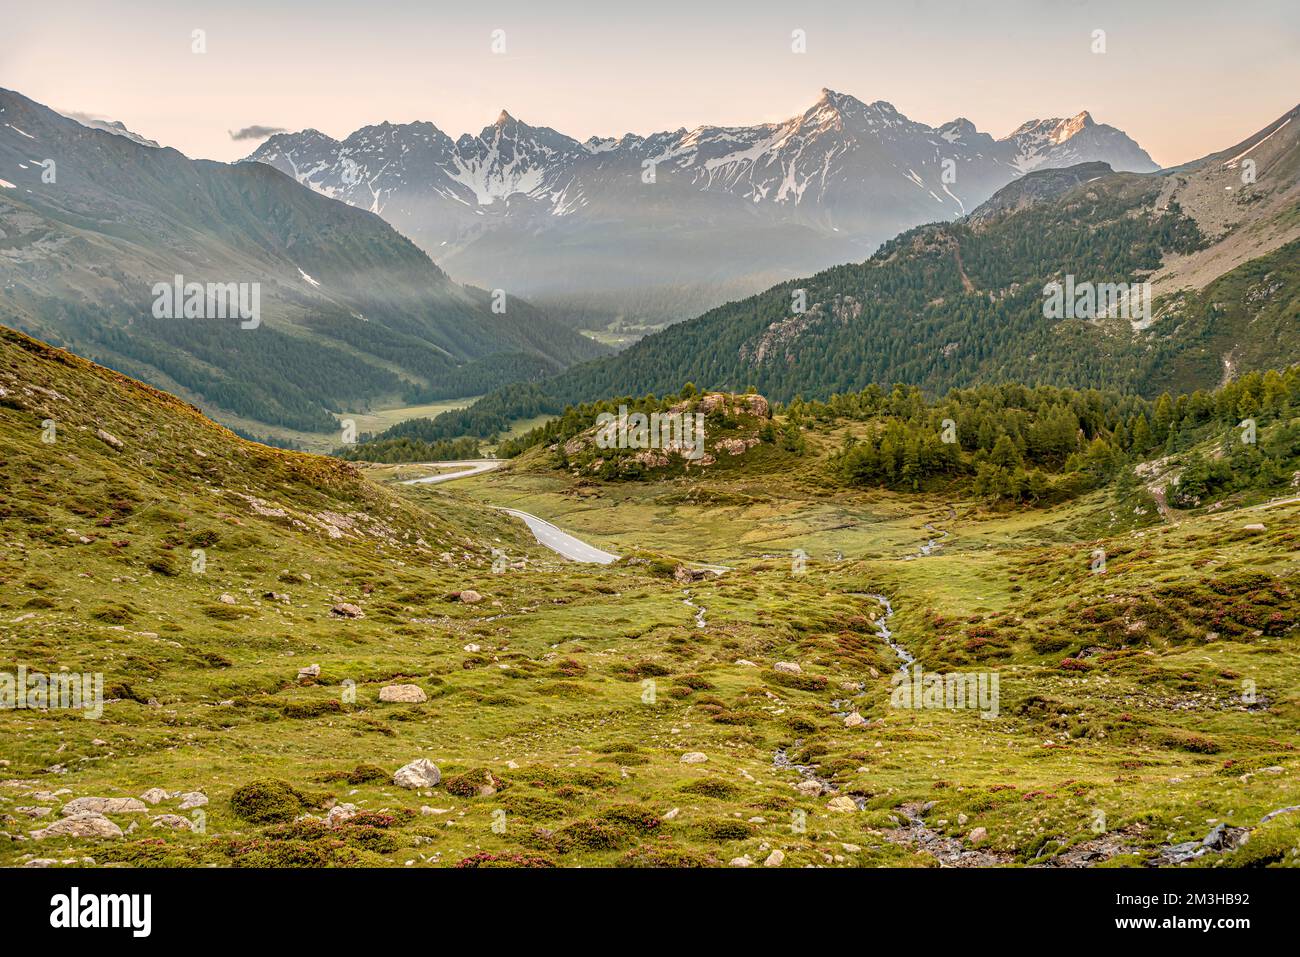 Early morning view across the Valposchaivo Valley seen from the Bernina Pass, Grisons, Switzerland Stock Photo